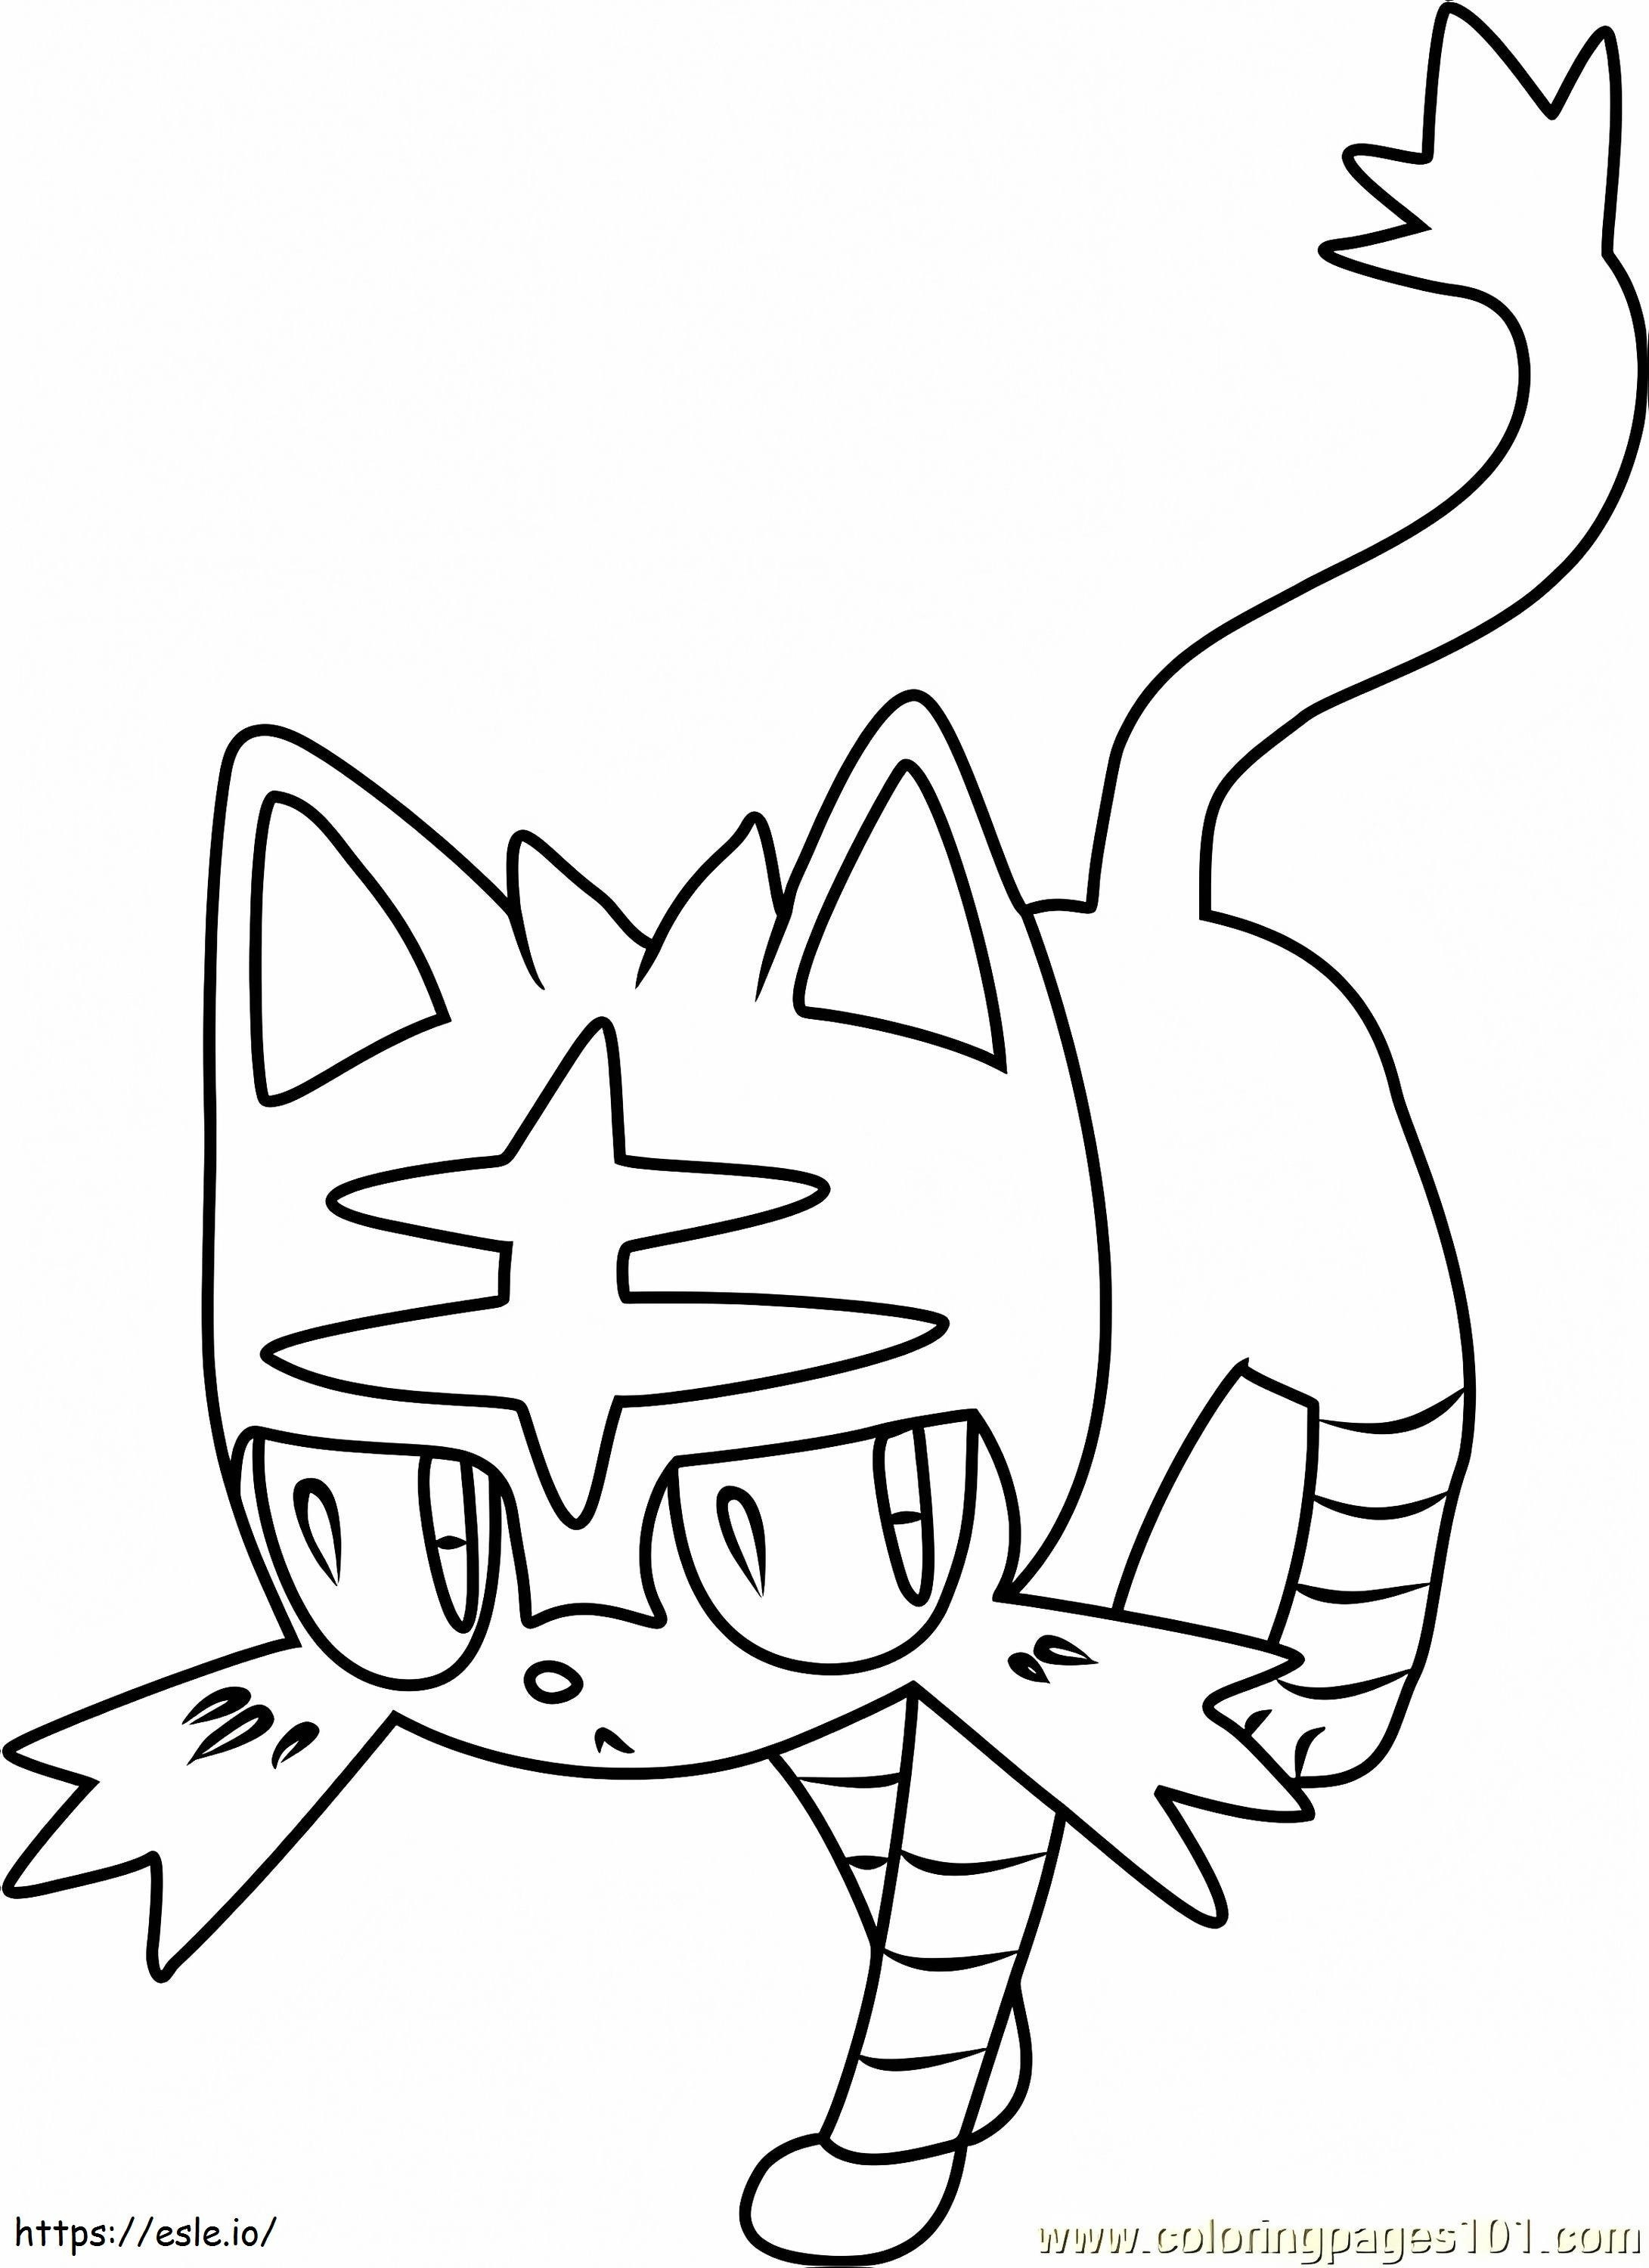 1529717415_60 coloring page